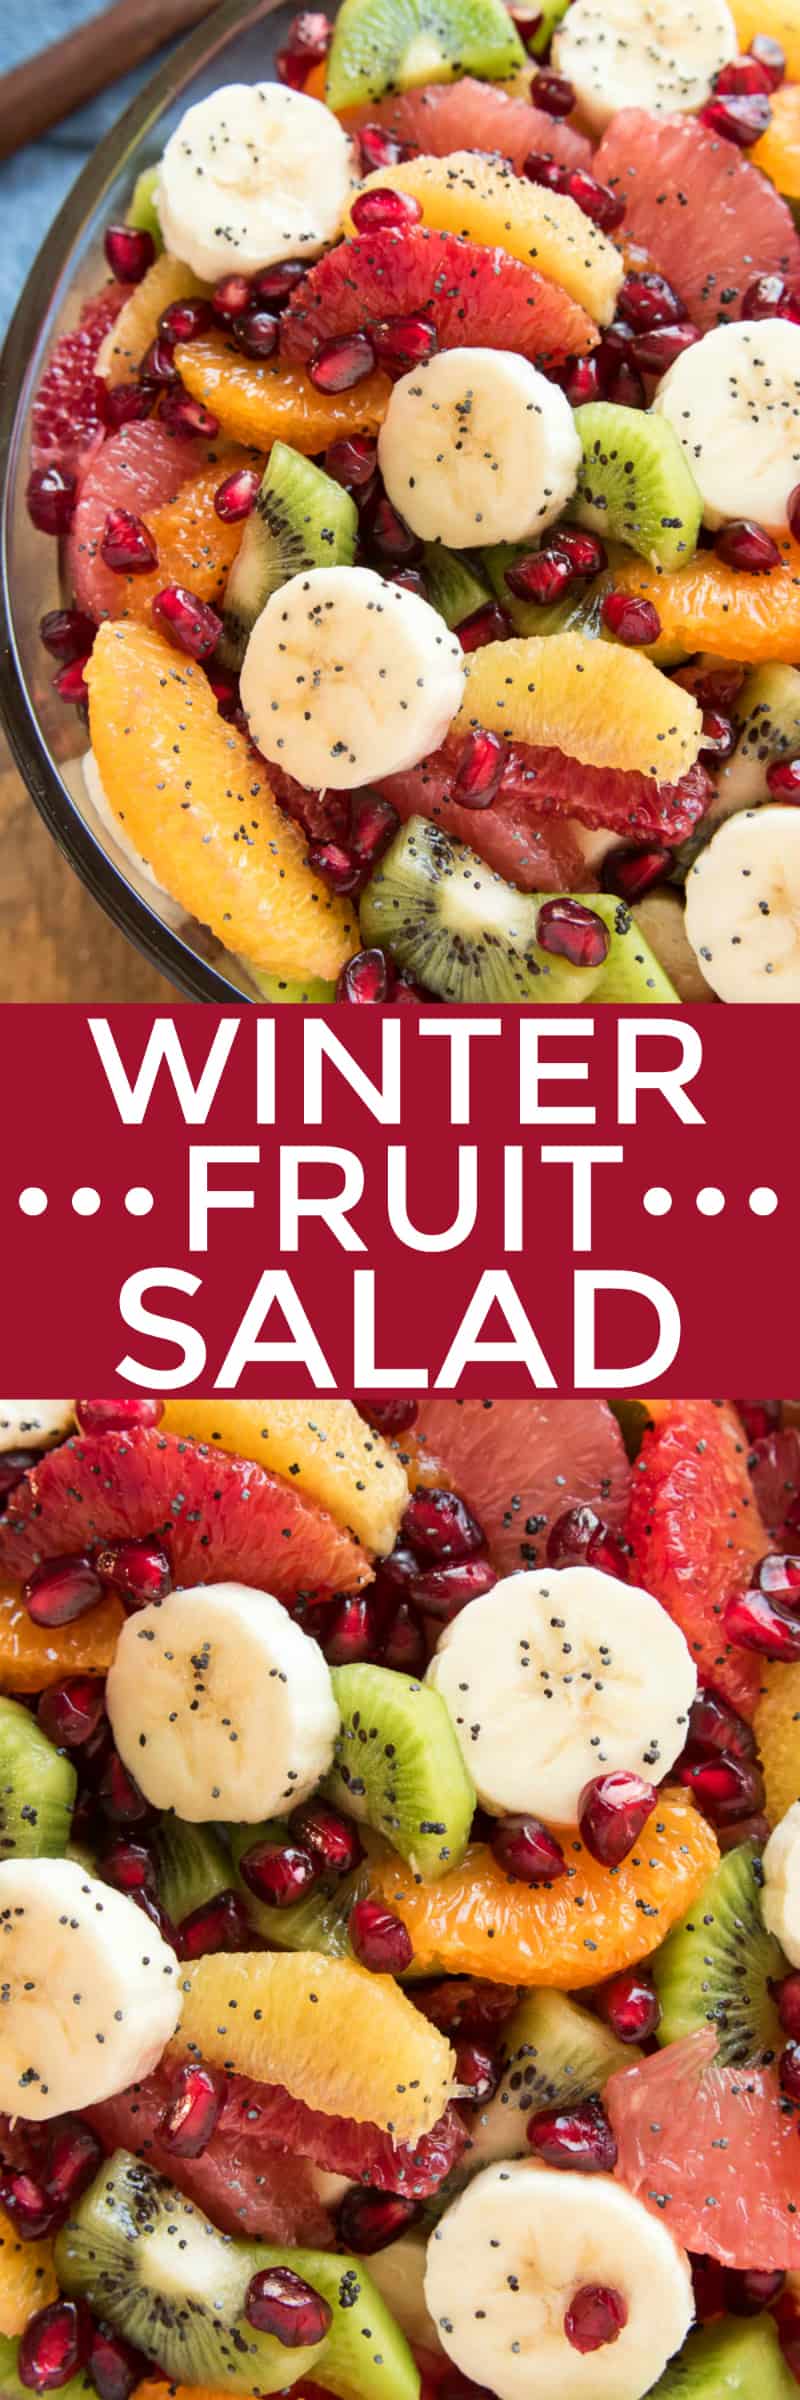 Take advantage of citrus season with this delicious Winter Fruit Salad! Loaded with all your favorite winter citrus fruits, plus bananas, kiwi, and pomegranate seeds, this salad is bright and sweet and guaranteed to help you beat the winter blues. And when you toss it in a sweet orange poppy seed simple syrup, the end result is a fruit salad you want to eat again and again, all winter long. Perfect for breakfast, lunch, or any meal in between, this salad is as healthy as it is delicious....and so pretty, too! Which makes it the ideal side dish for any special occasion. No matter how you slice it, this Winter Fruit Salad is guaranteed to become new favorite and sure to be the star of the show!